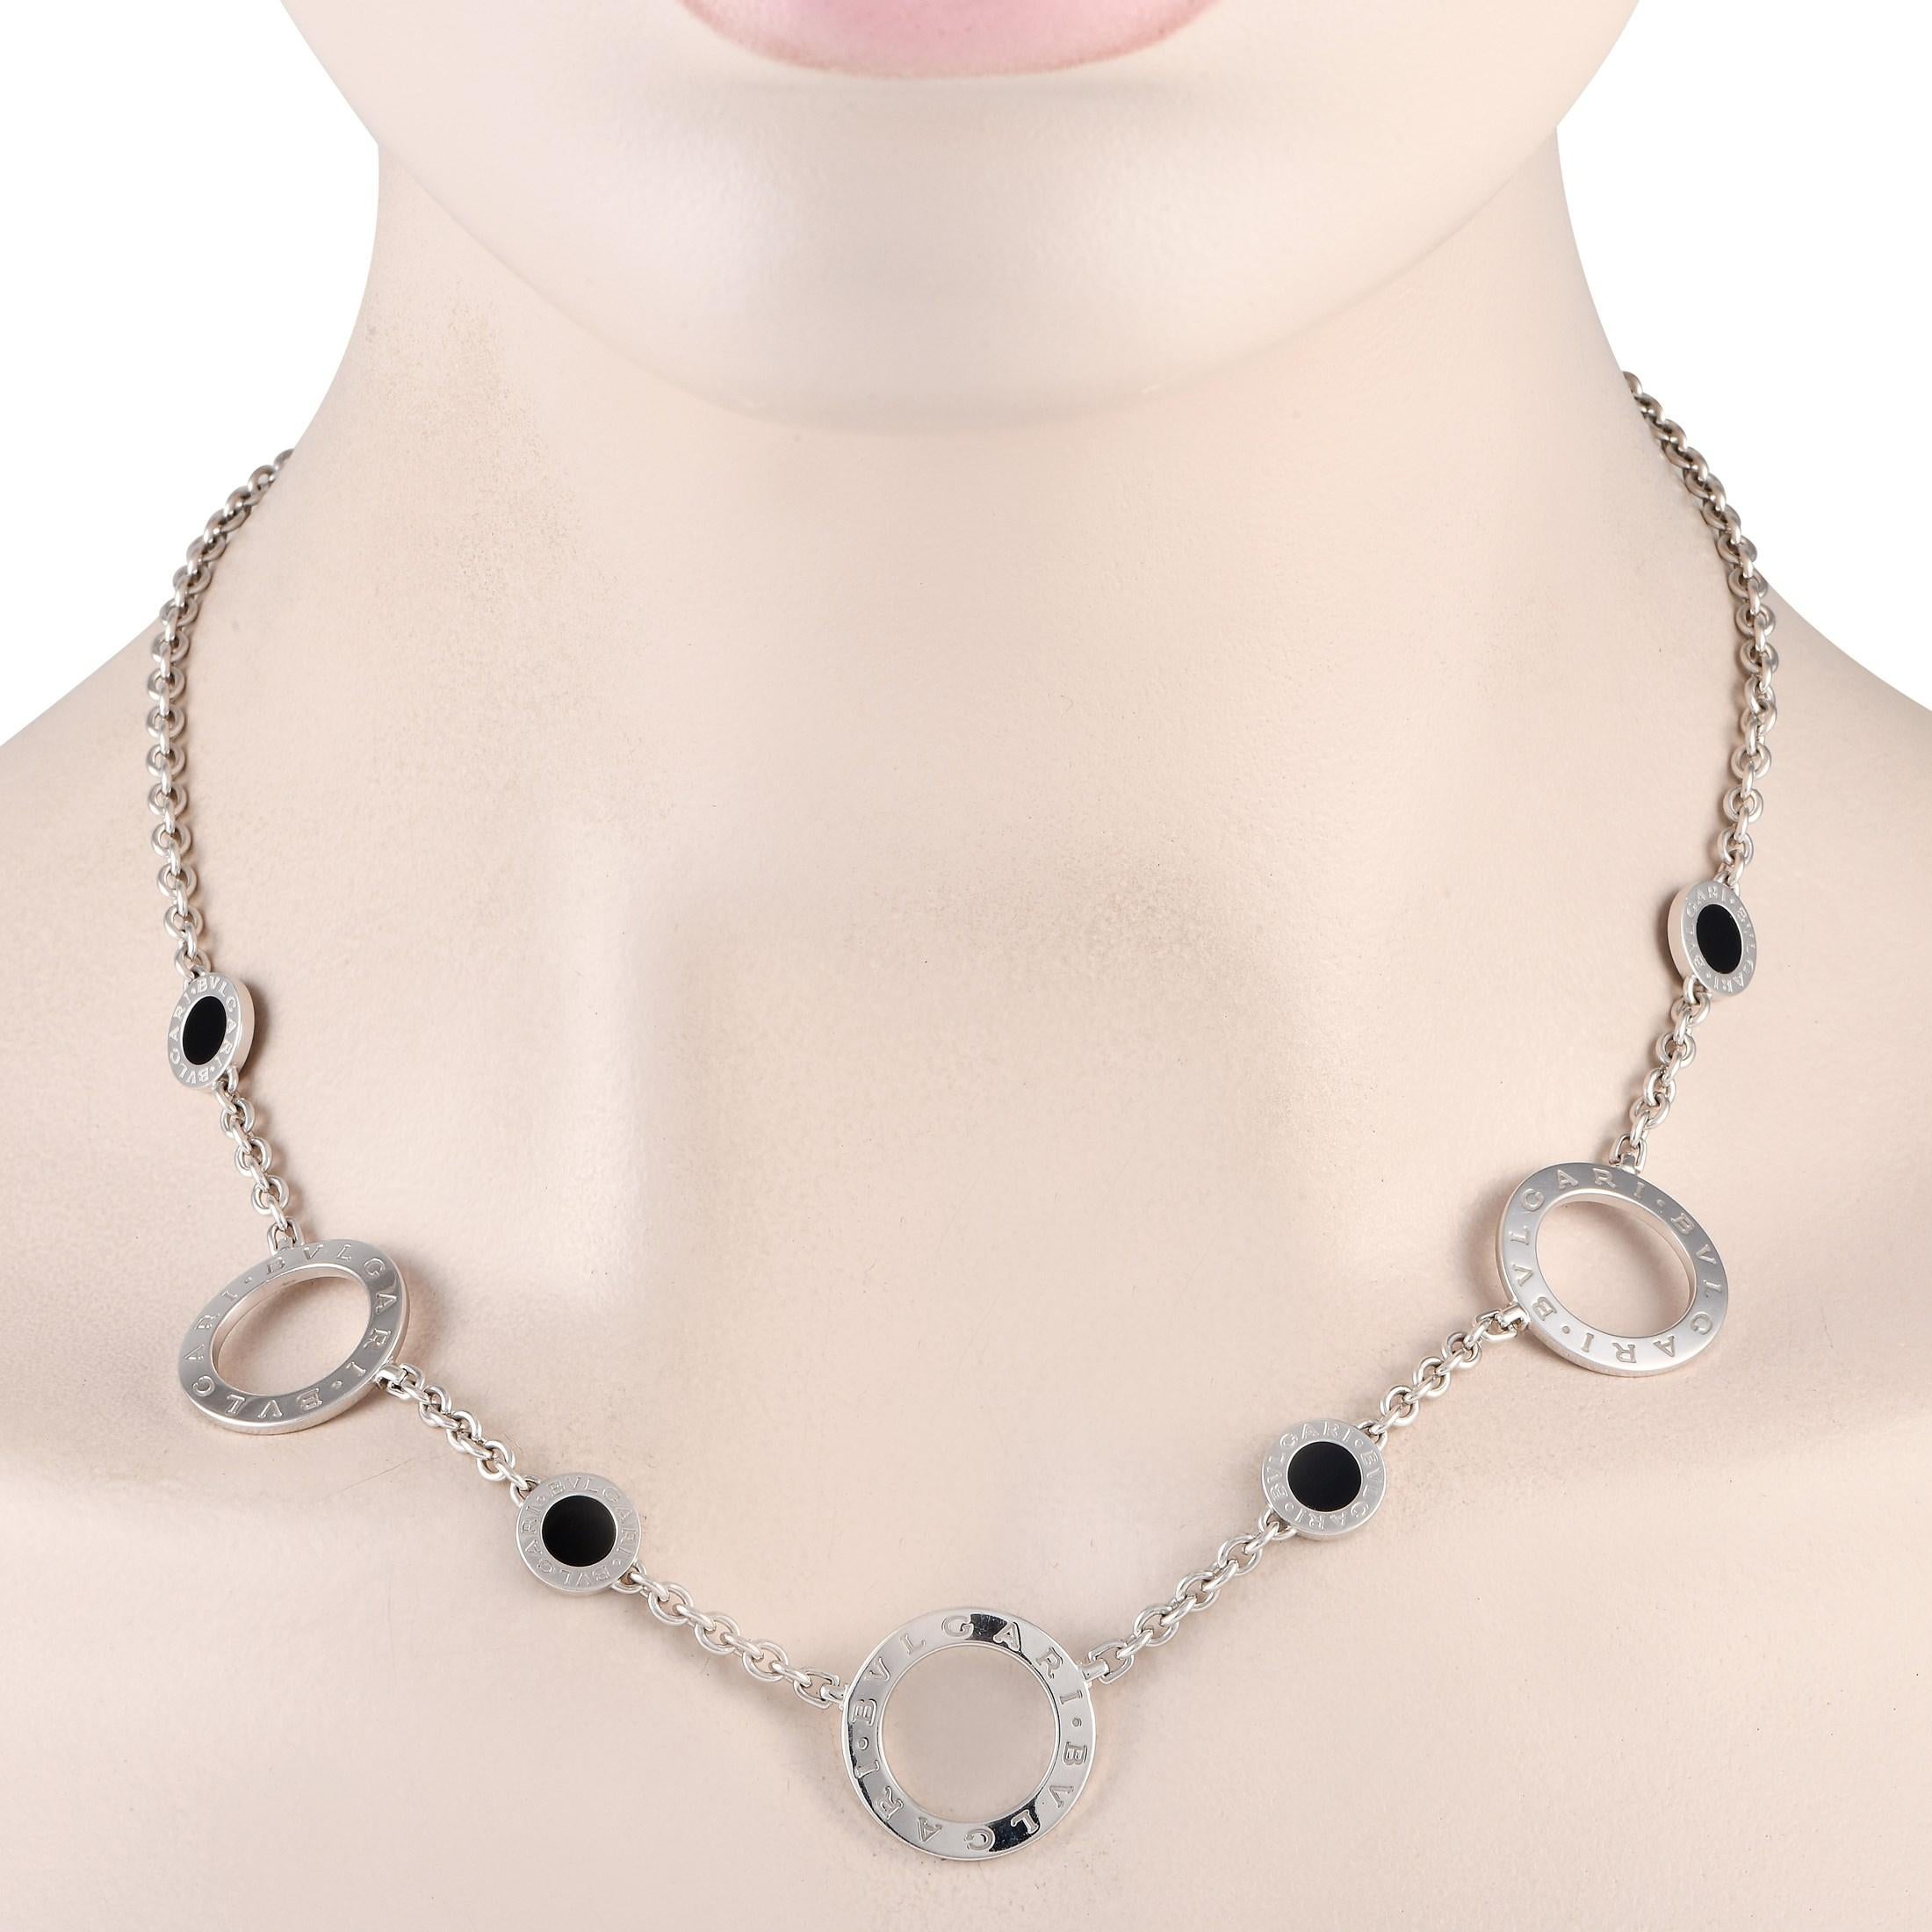 The Bvlgari Bvlgari 18K White Gold Onyx Necklace is expertly crafted in 18K white gold. It features three hoops with the Bvlgari Bvlgari engraved text logo. Four small discs with circular onyx plaques sit in between each white gold hoop. The